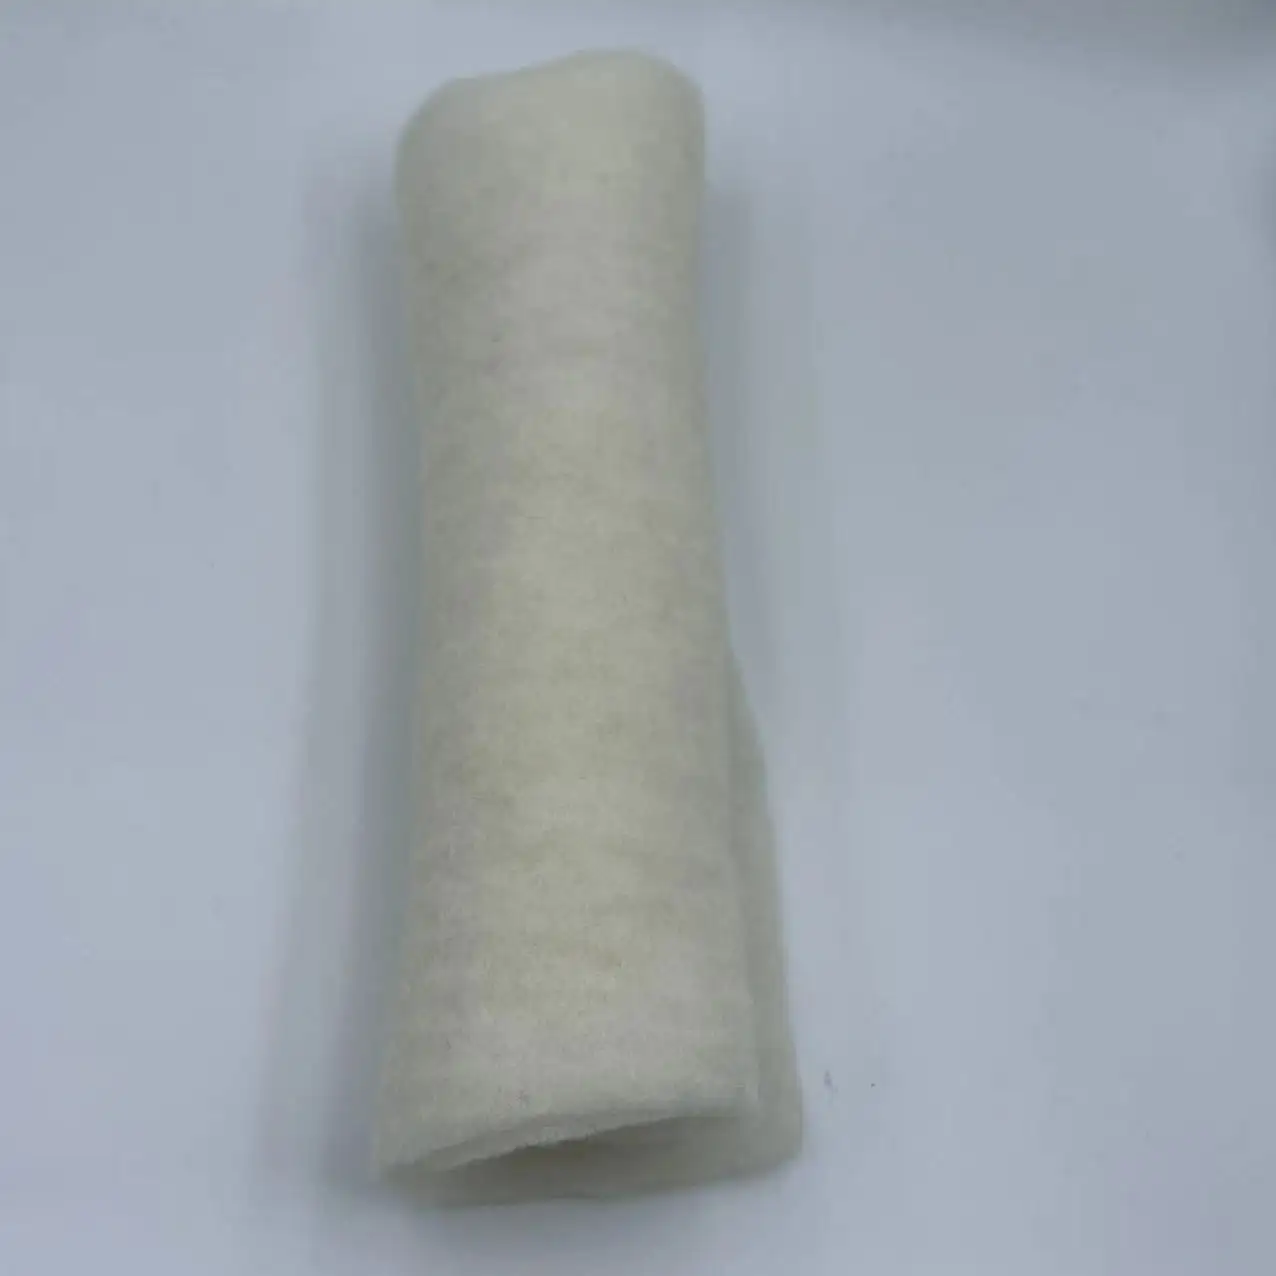 nonwoven felt fabric from china Wool flocculents for cold and warm clothing filling products felt fabric rolls for sale